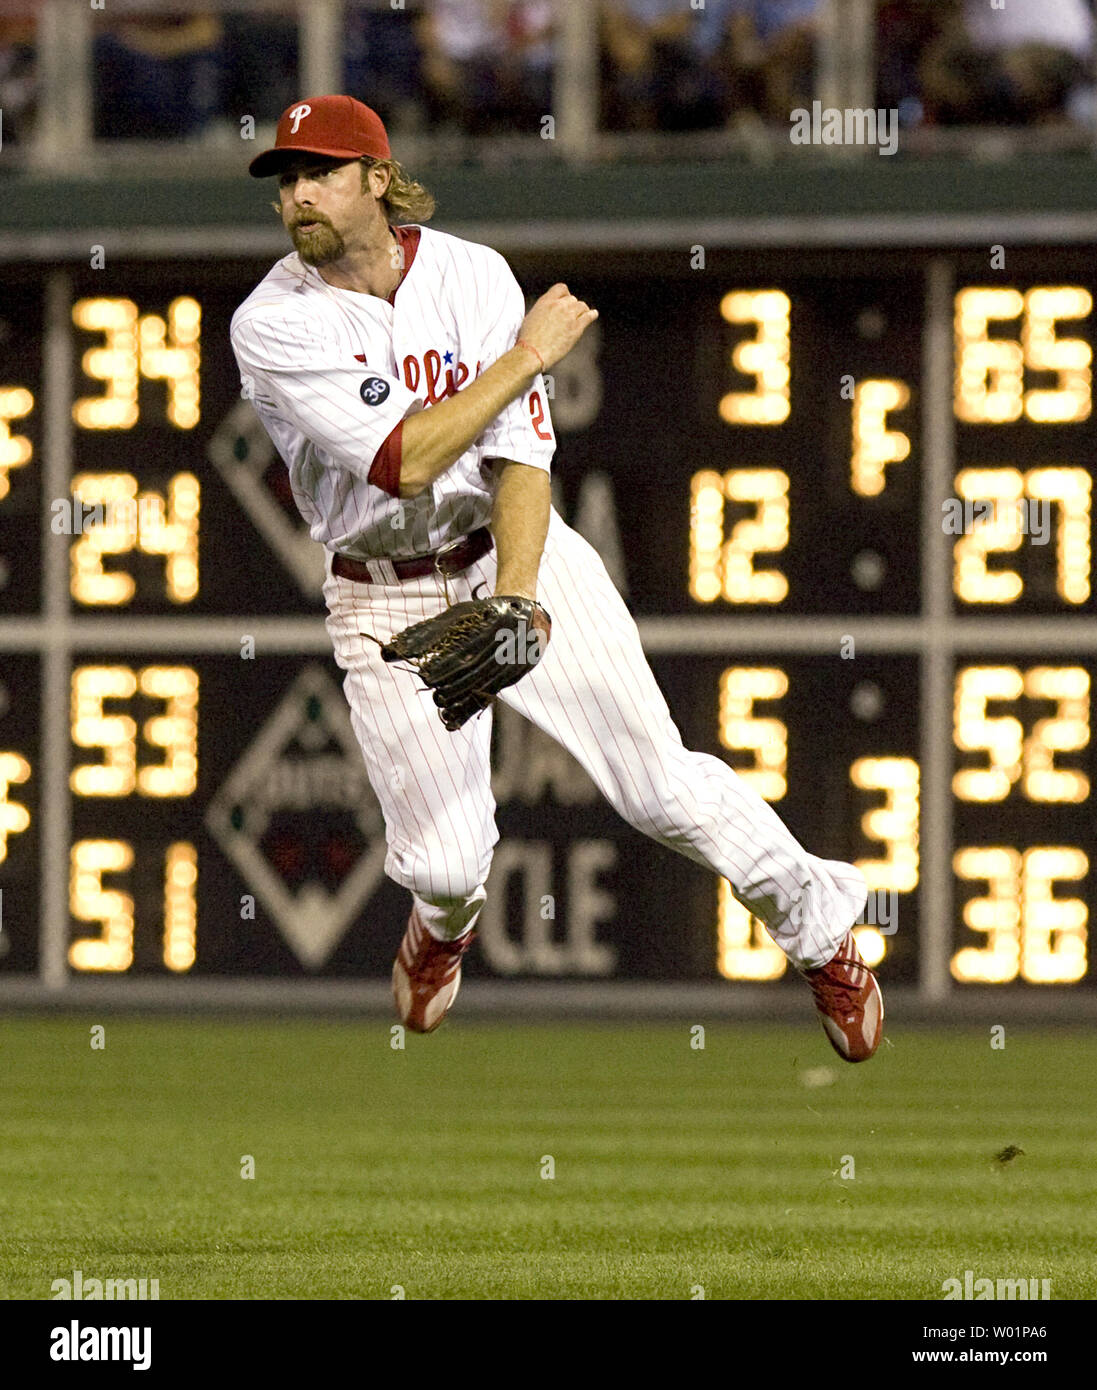 Philadelphia Phillies right fielder Jason Werth is off the ground as he tries to catch a hit by Houston Astros Humberto Quintero to first in time, but a throwing error gave Quintero a base hit during fifth inning in Philadelphia August 25, 2010.   UPI/John Anderson Stock Photo